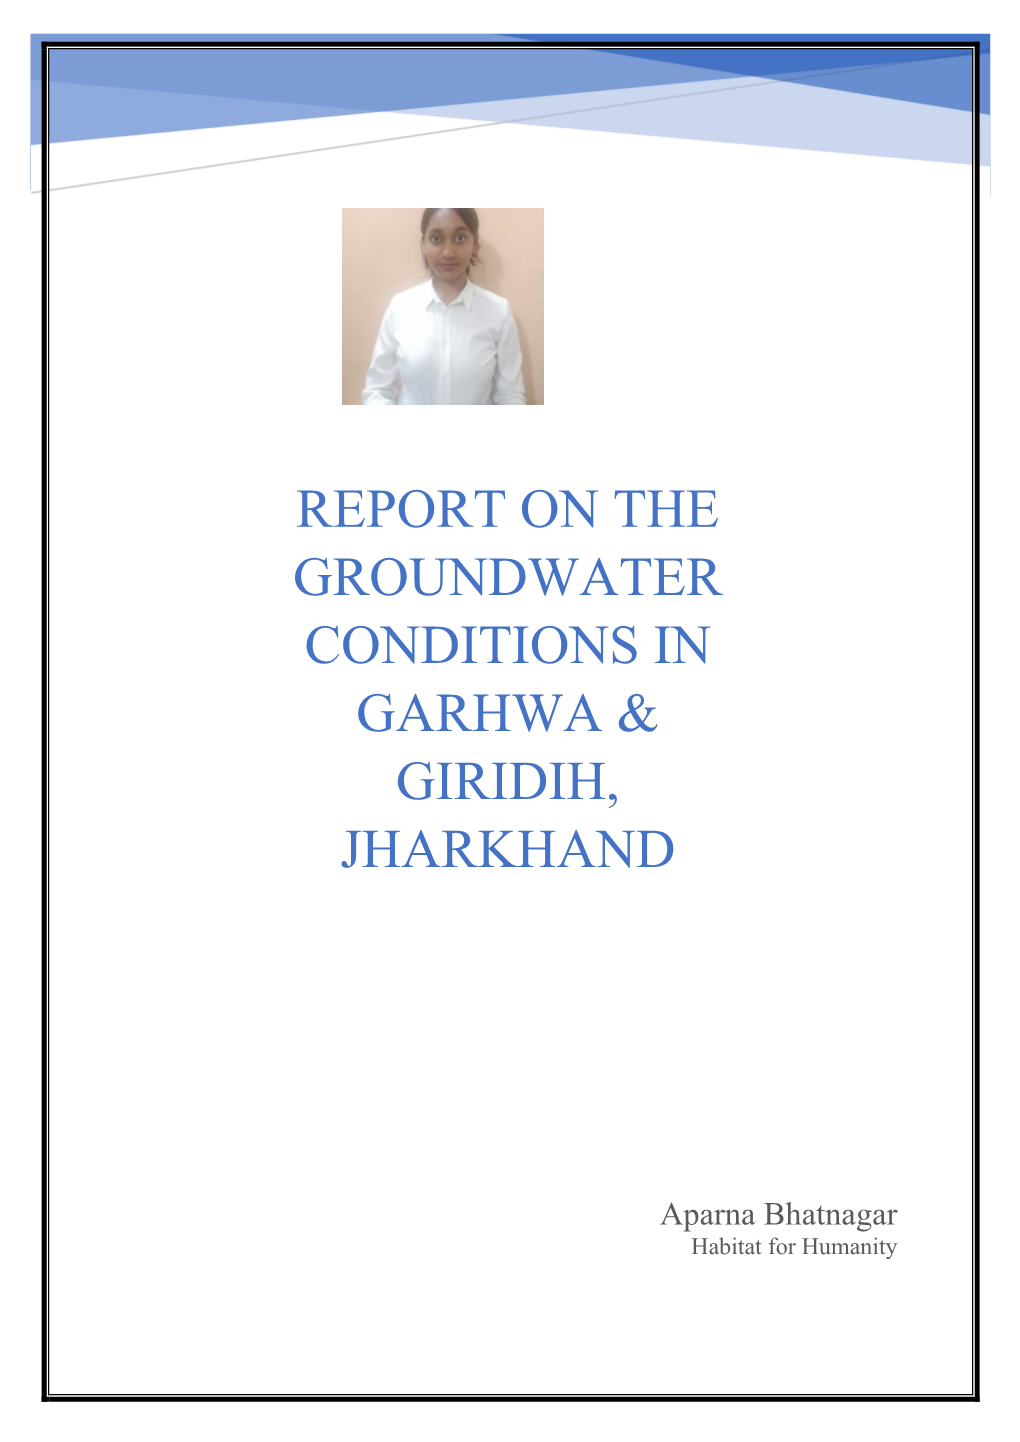 Report on the Groundwater Conditions in Garhwa & Giridih, Jharkhand